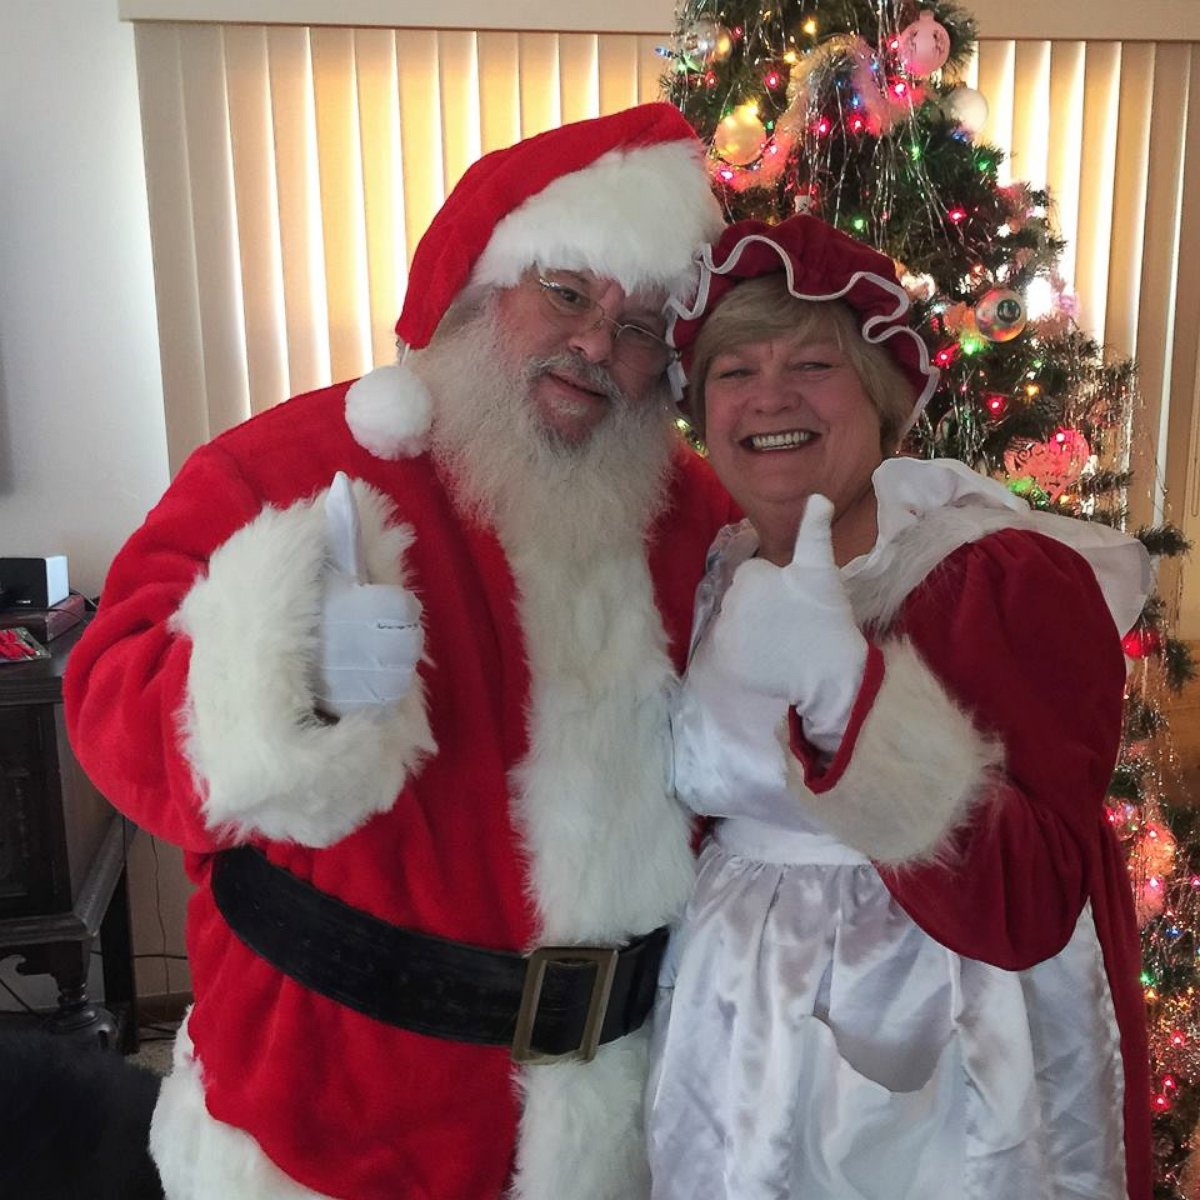 PHOTO: Jeff and Mary Brookstein of Omaha, Nebraska, officially changed their names to Santa and Merry Christmas Claus.